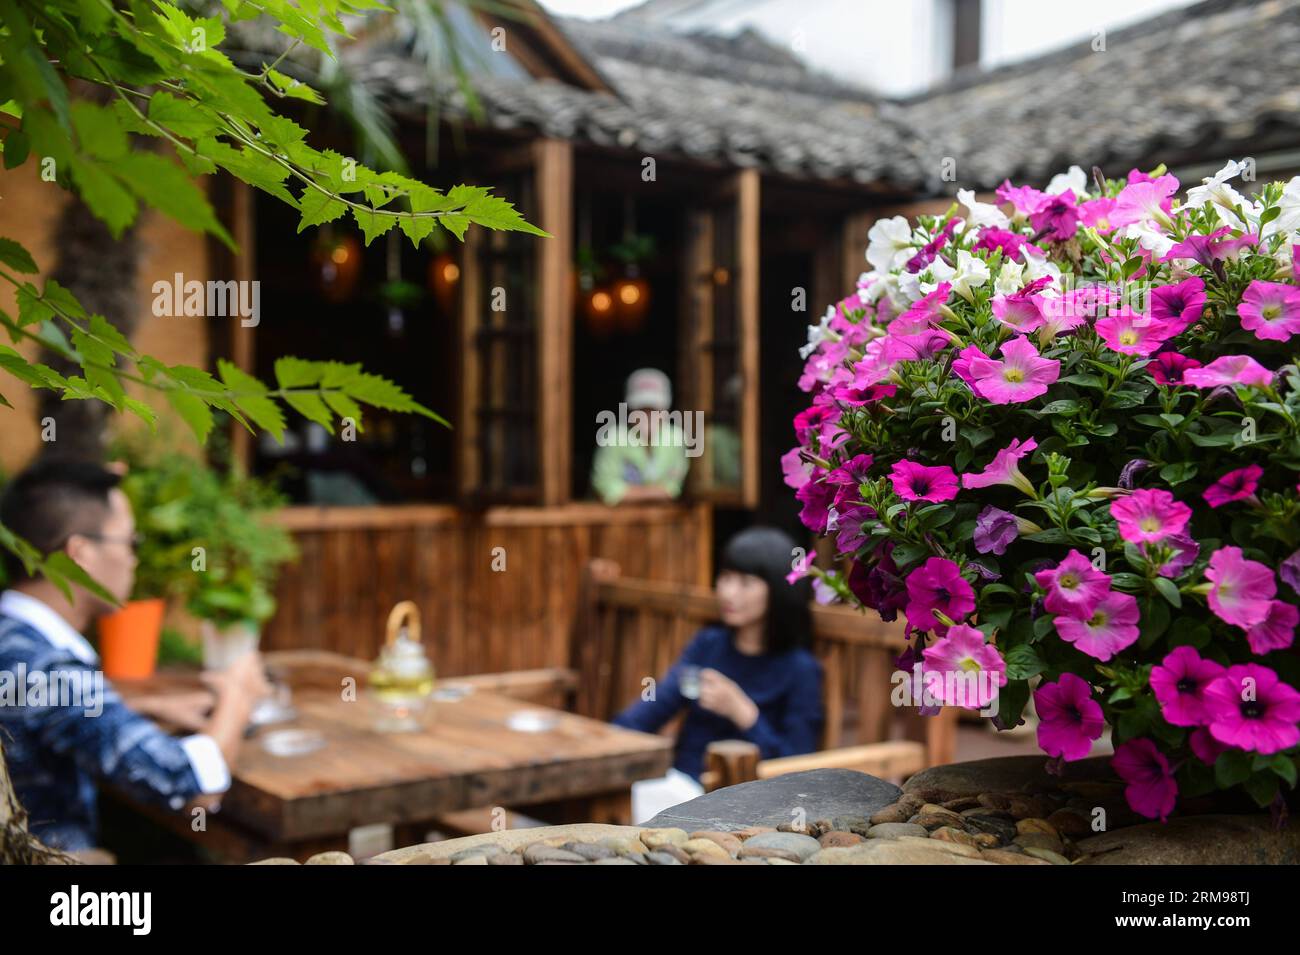 (140513) -- TONGLU, May 13, 2014 (Xinhua) -- Tourists have tea at the swinery tea bar in Dipu Village of Jiangnan Town in Tonglu County, east China s Zhejiang Province, May 13, 2014. Dipu Village, a national historical and cultural village with nearly a thousand years history, has committed to environment reform, village protection and tourism development for the past few years. The swinery tea bar sets a successful example of the transform. The bar used to be five messy stone houses for pigs keeping. After renovation, it functions as a modern tea bar with traditional appearance, attracting ma Stock Photo